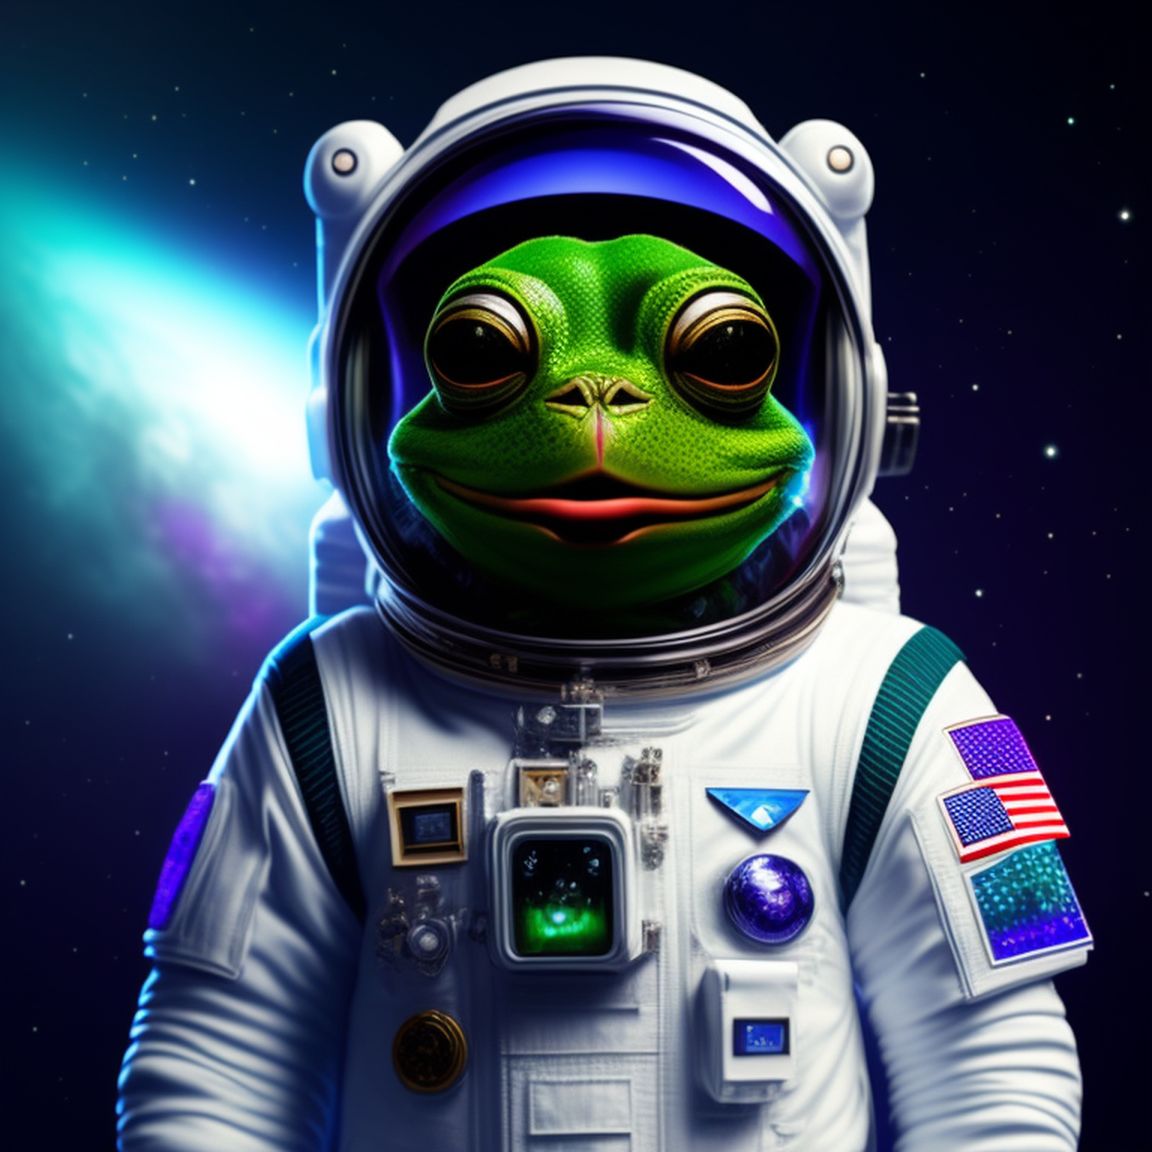 Green pepe Frog with tongue out. Astronaut suit. With frog hands. universe in the background.
Astronaut suit, Detailed, Intricate, scientific, mathematical, Digital art, blue and purple lighting, Futuristic, by artificial intelligence, trending on artstation.